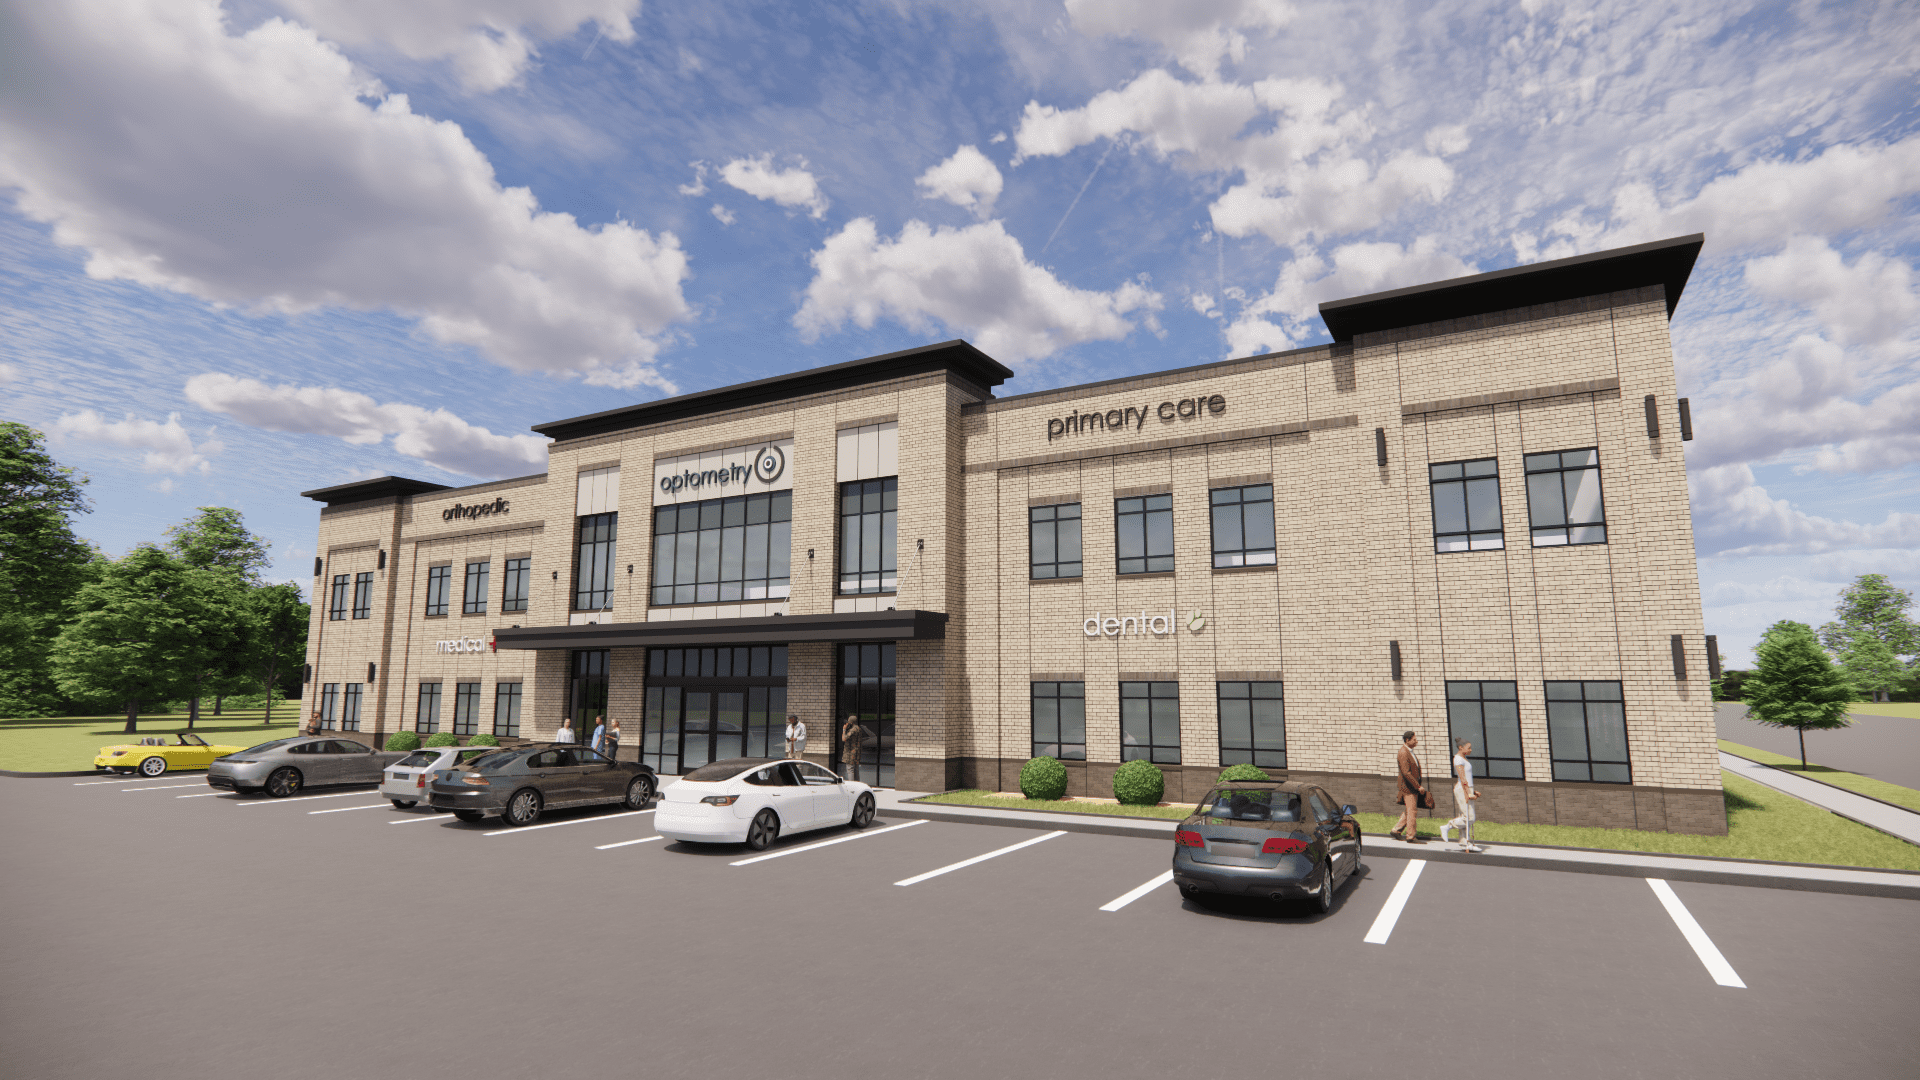 Rendering of two story, brick, medical office building